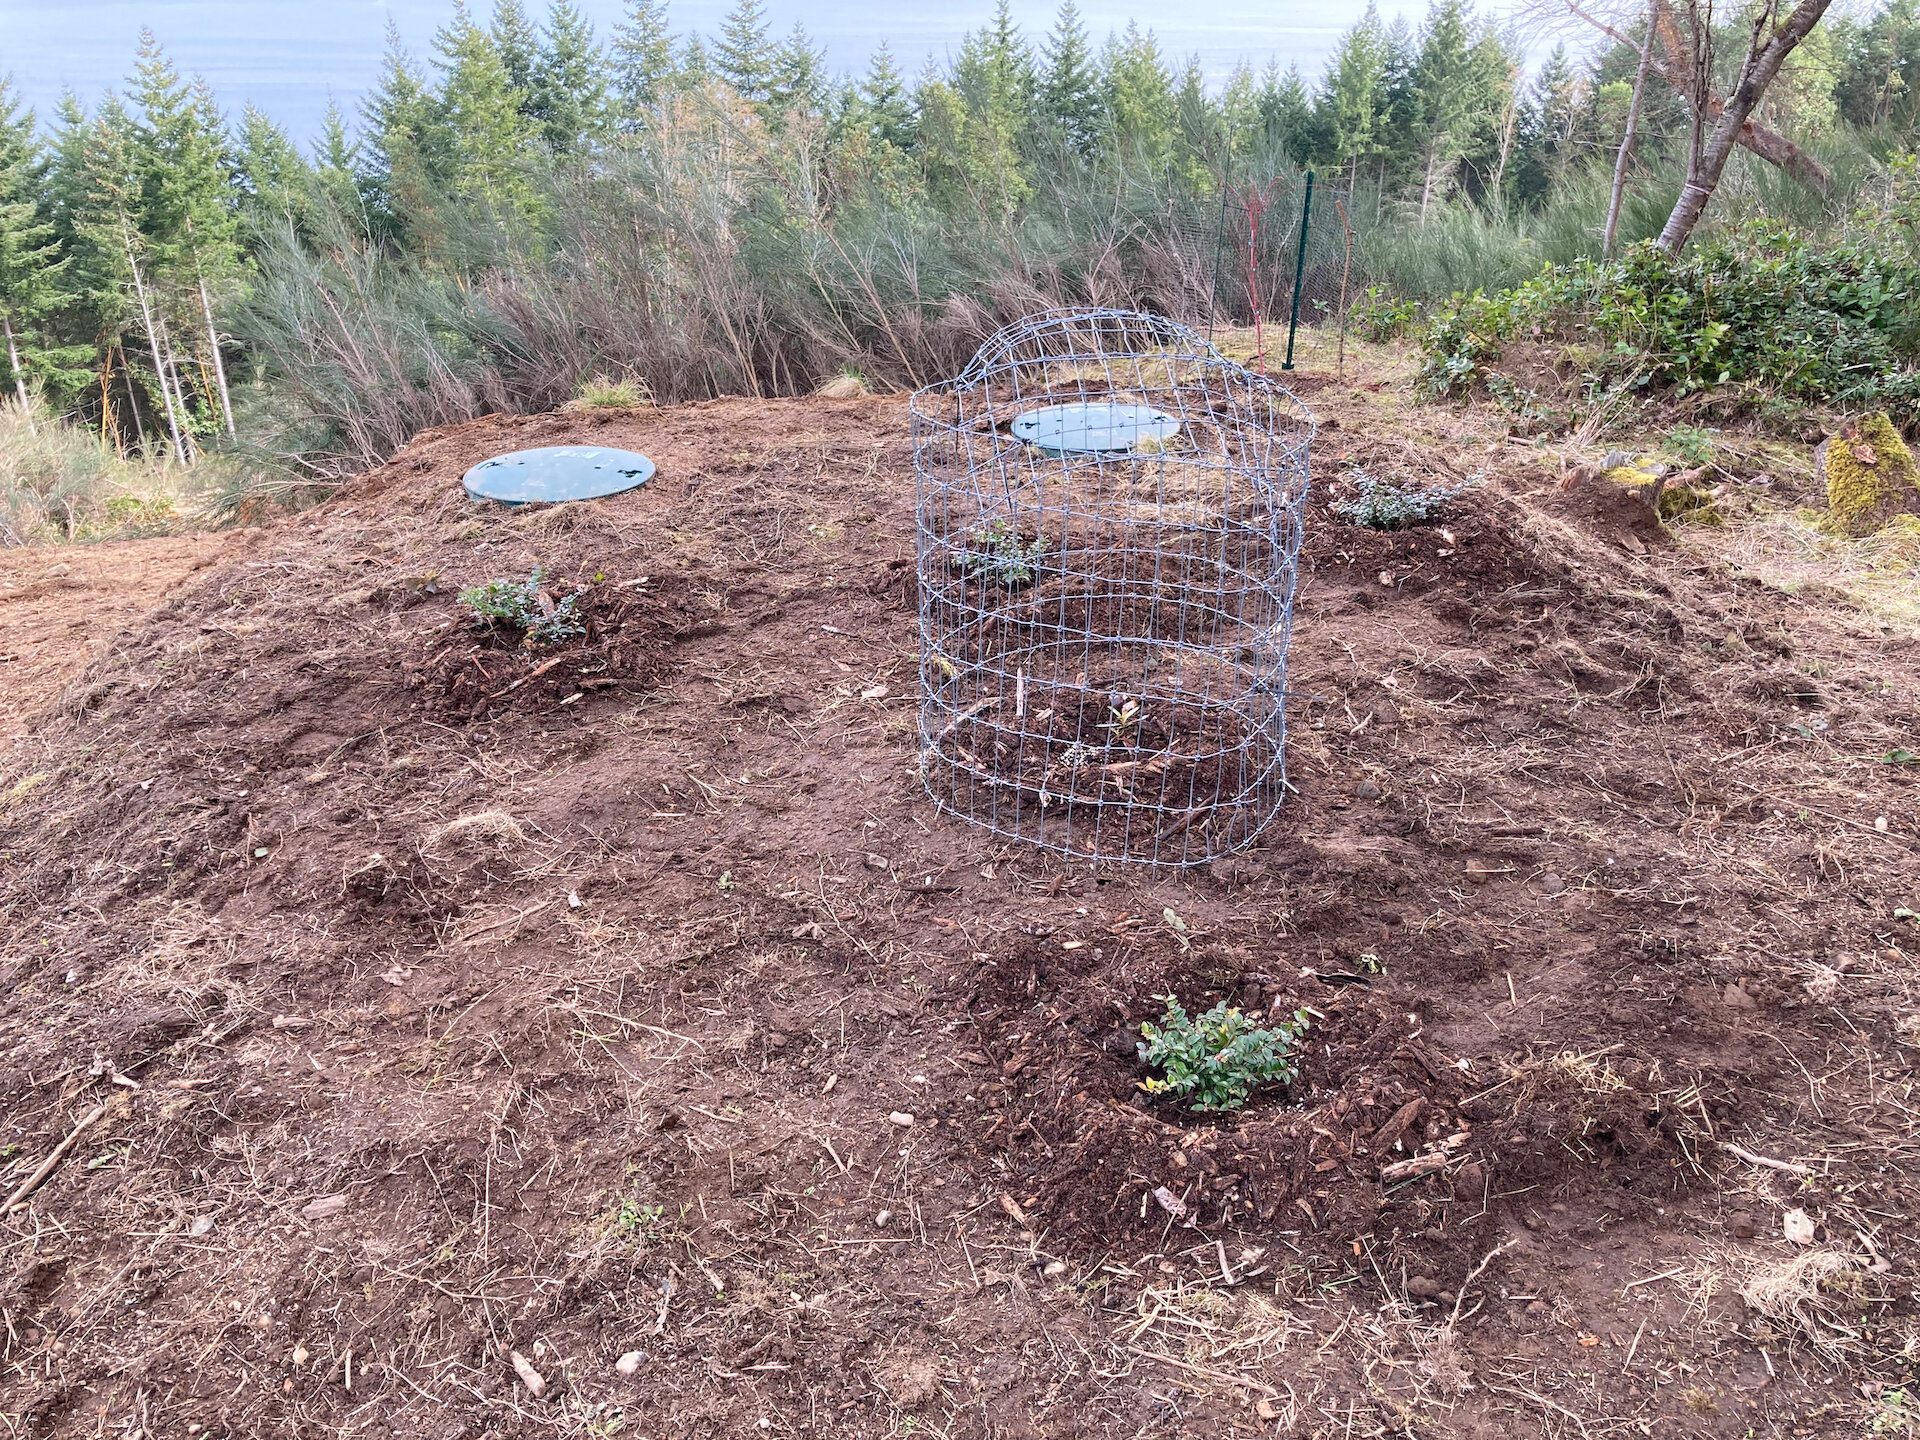  We planted the tiny arbutus (in the cage) surrounded by huckleberries. 